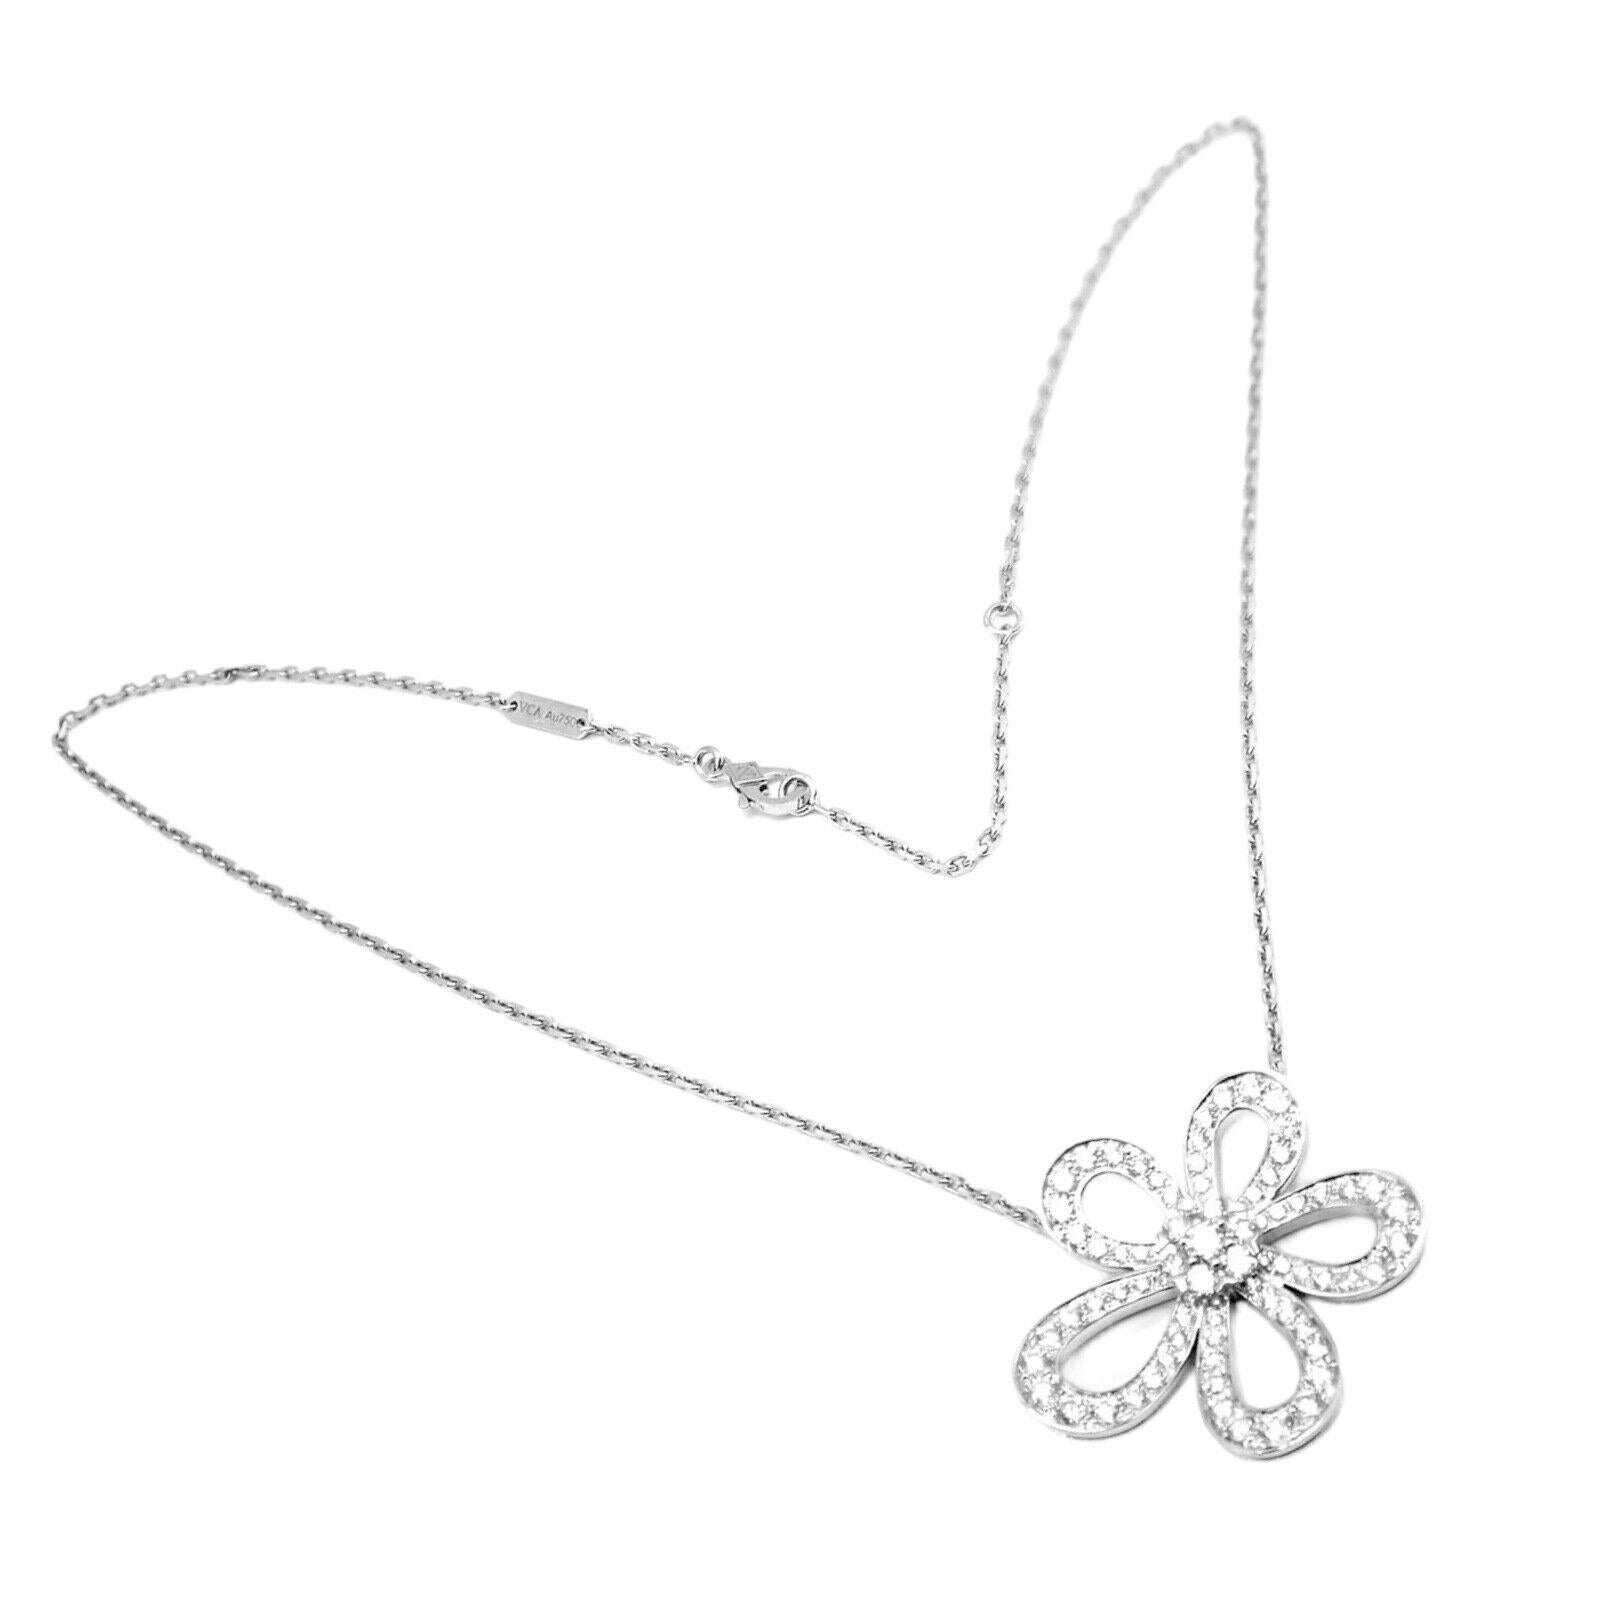 18k White Gold Diamond Flowerlace Large Pendant Necklace by Van Cleef & Arpels.
With 78 round brilliant cut diamonds VS1 clarity, E color total weight approximately 2.37ct
The Authentic Van Cleef & Arpels Flowerlace 18k Gold Diamond Pendant Necklace